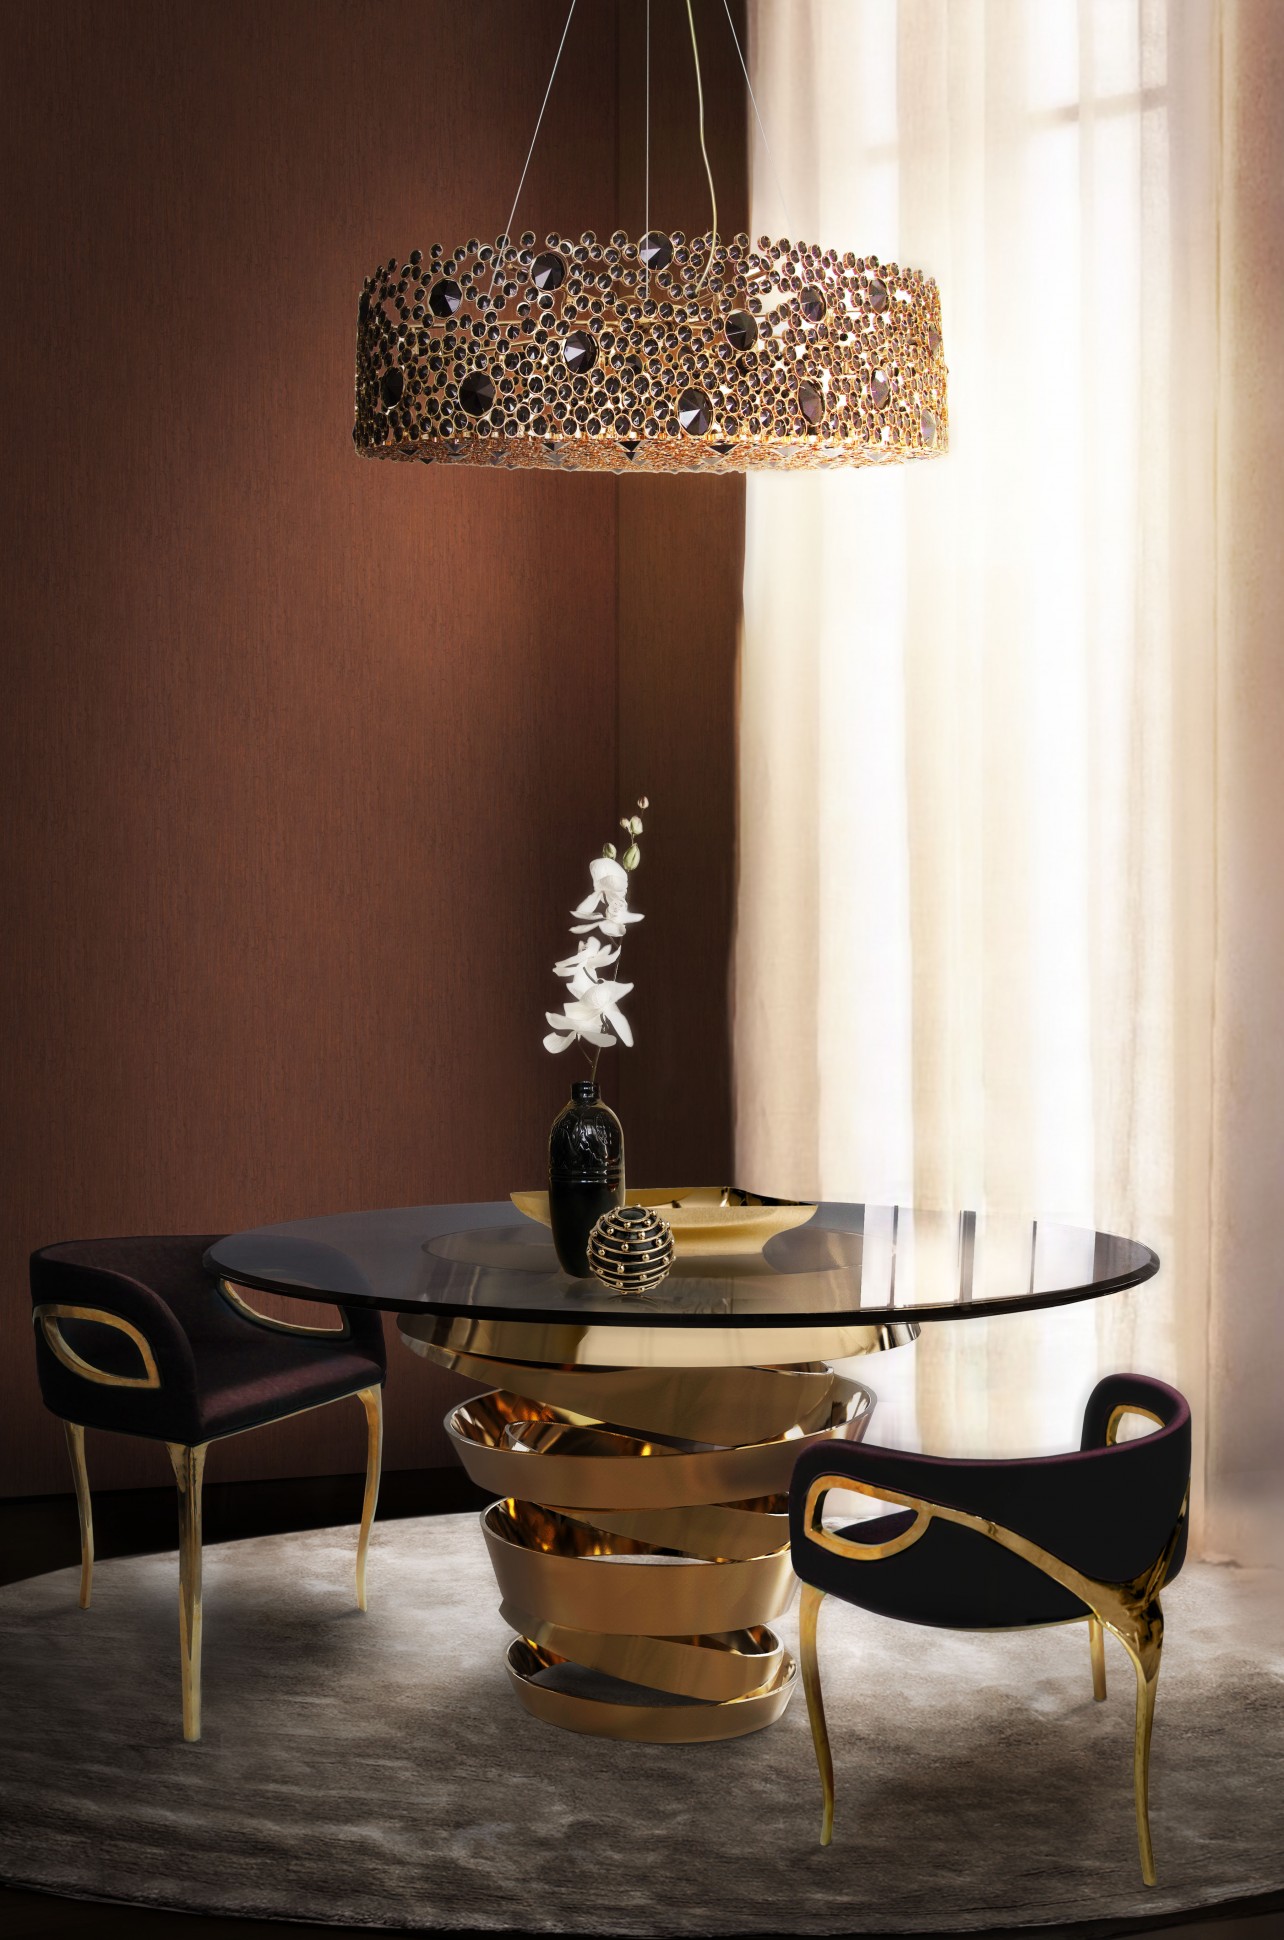 10 Trendy Dining Rooms Decoration Ideas to Inspire You